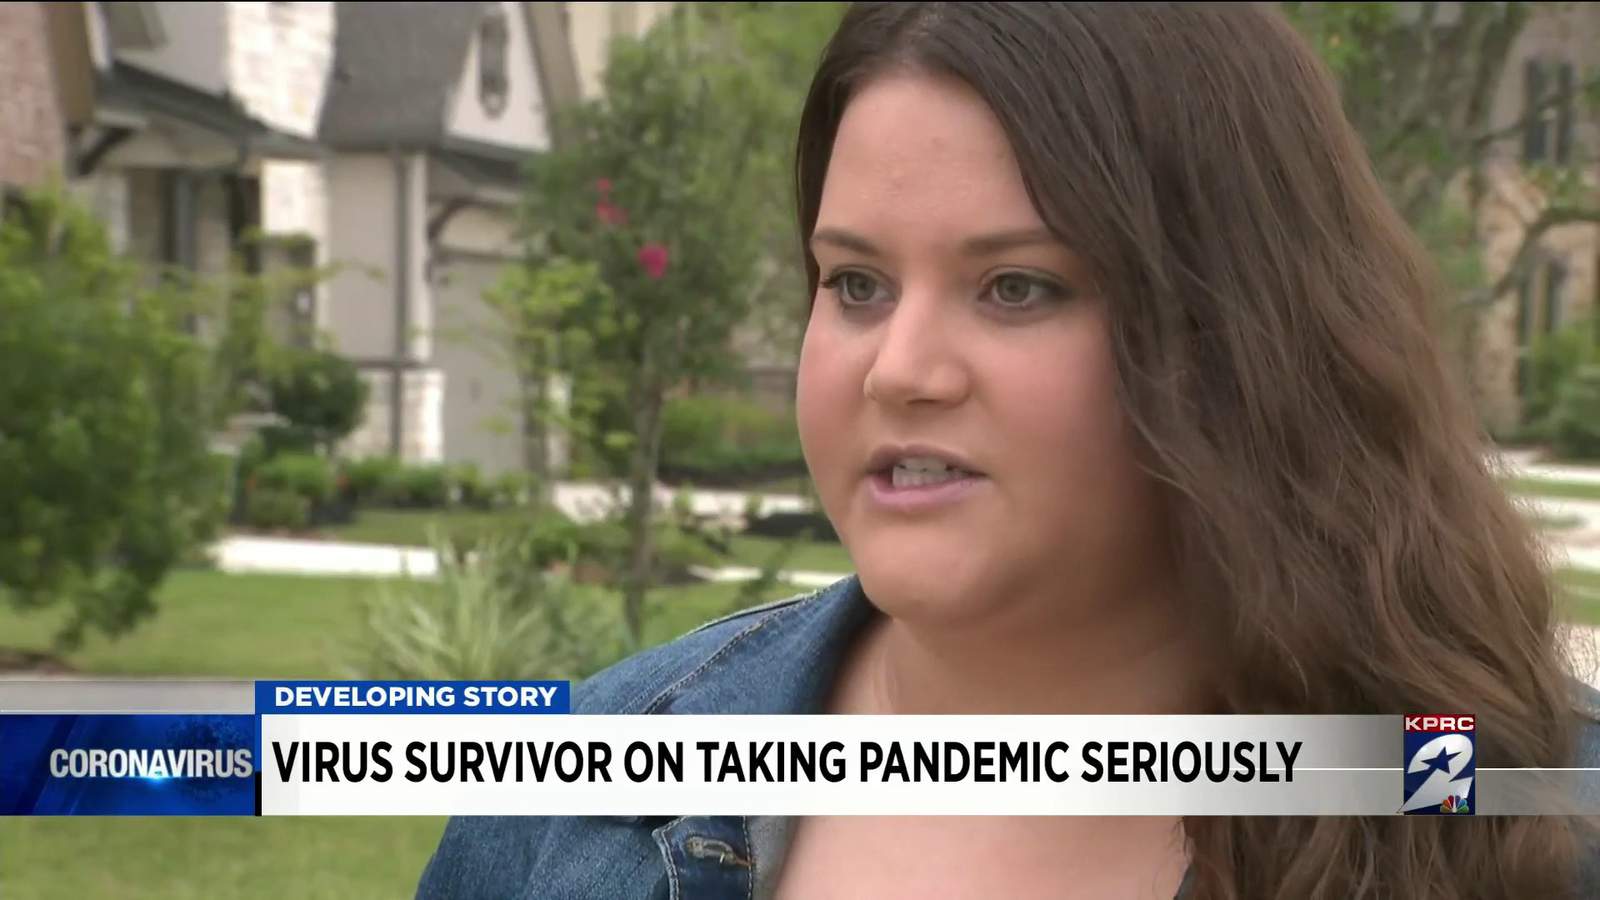 COVID-19 survivor urges others to take pandemic seriously